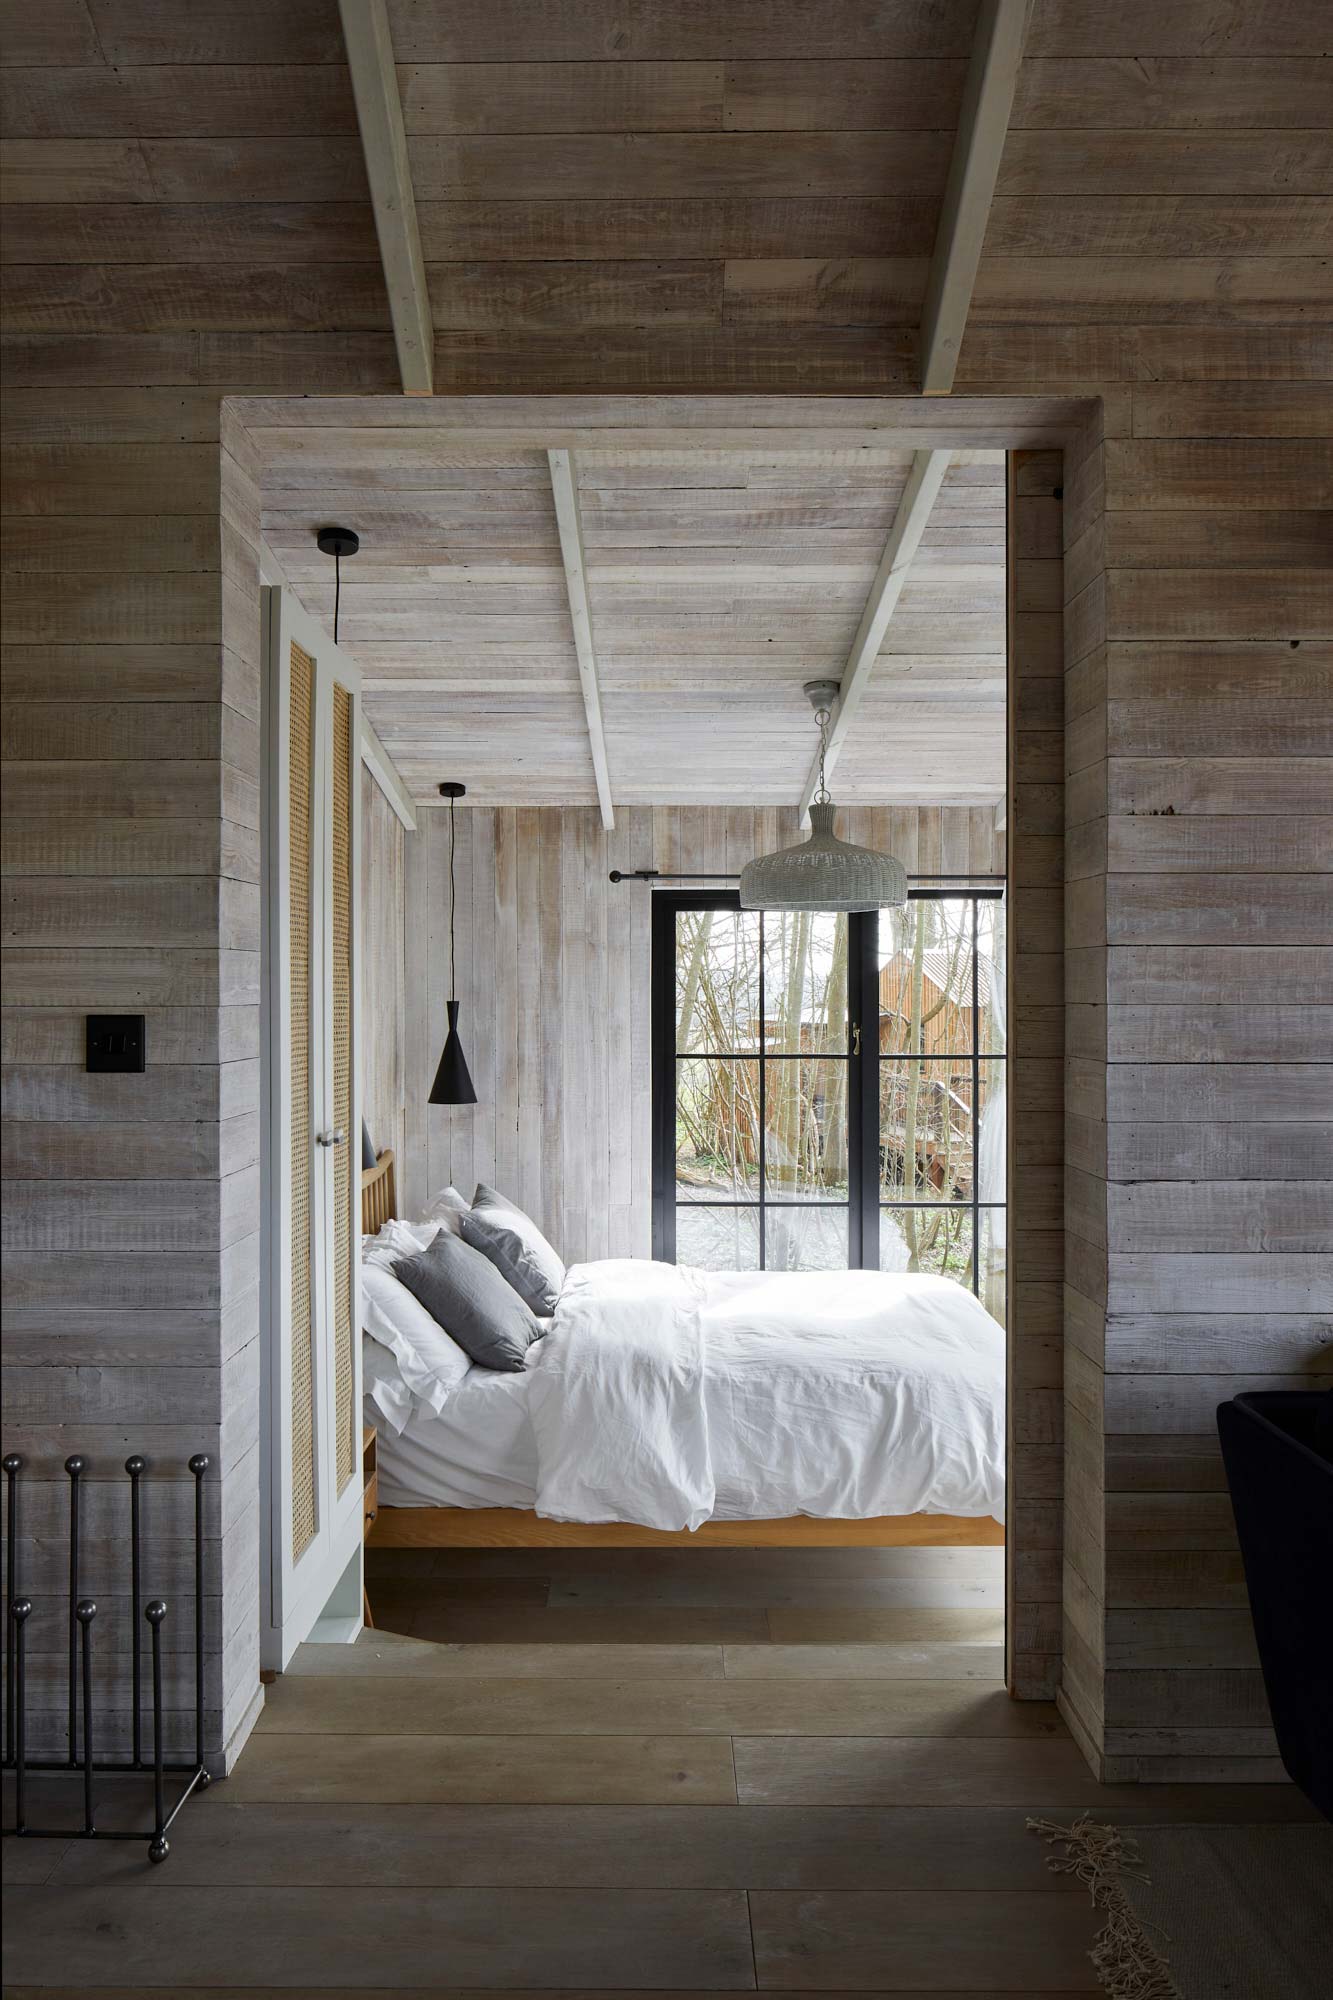 Treehouse bedroom with white cladded walls